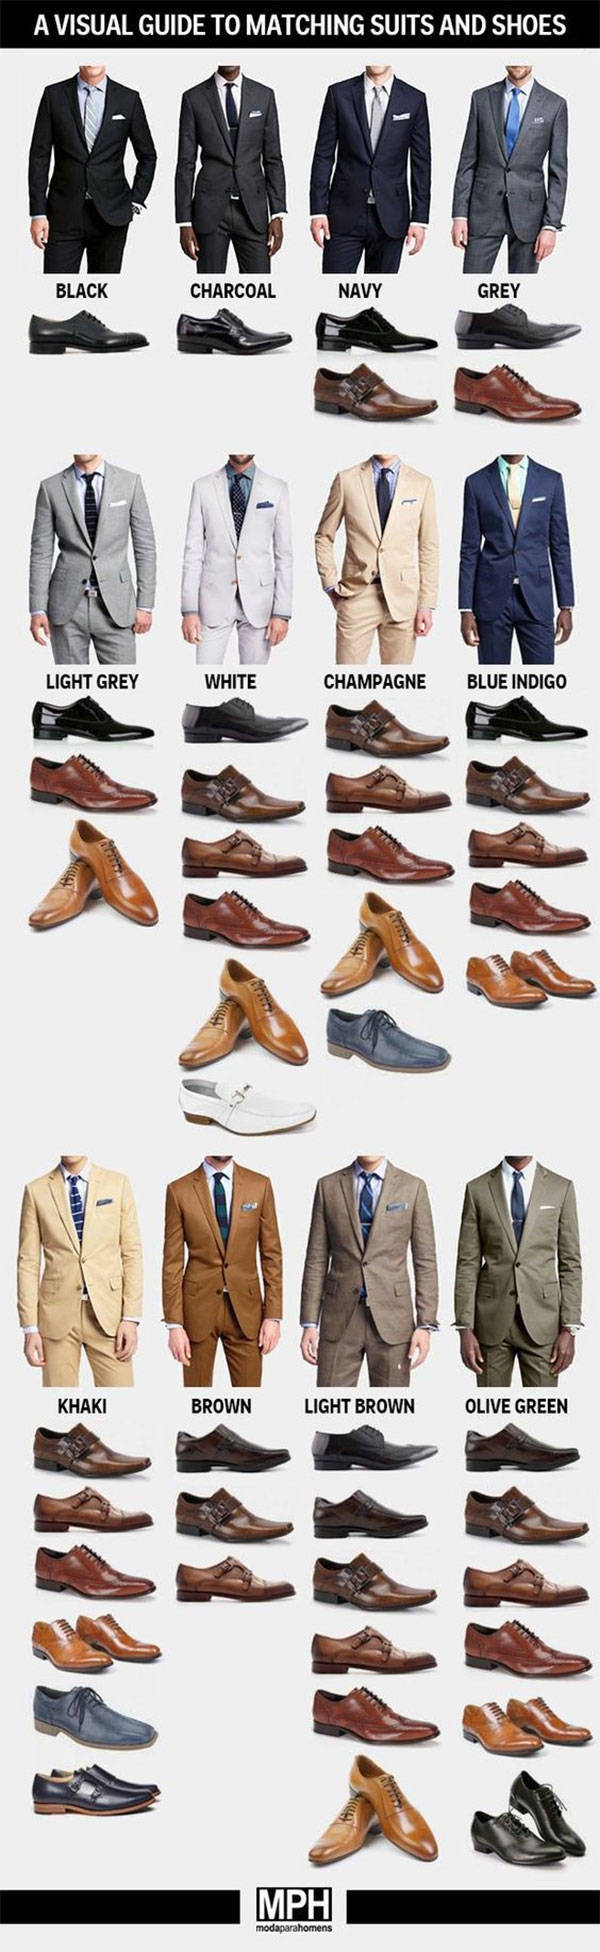 suit color shoes - Avisual Guide To Matching Suits And Shoes Black Charcoal Navy Grey Light Grey White Champagne Blue Indigo Khaki Brown Light Brown Olive Green Mph modaparahomens